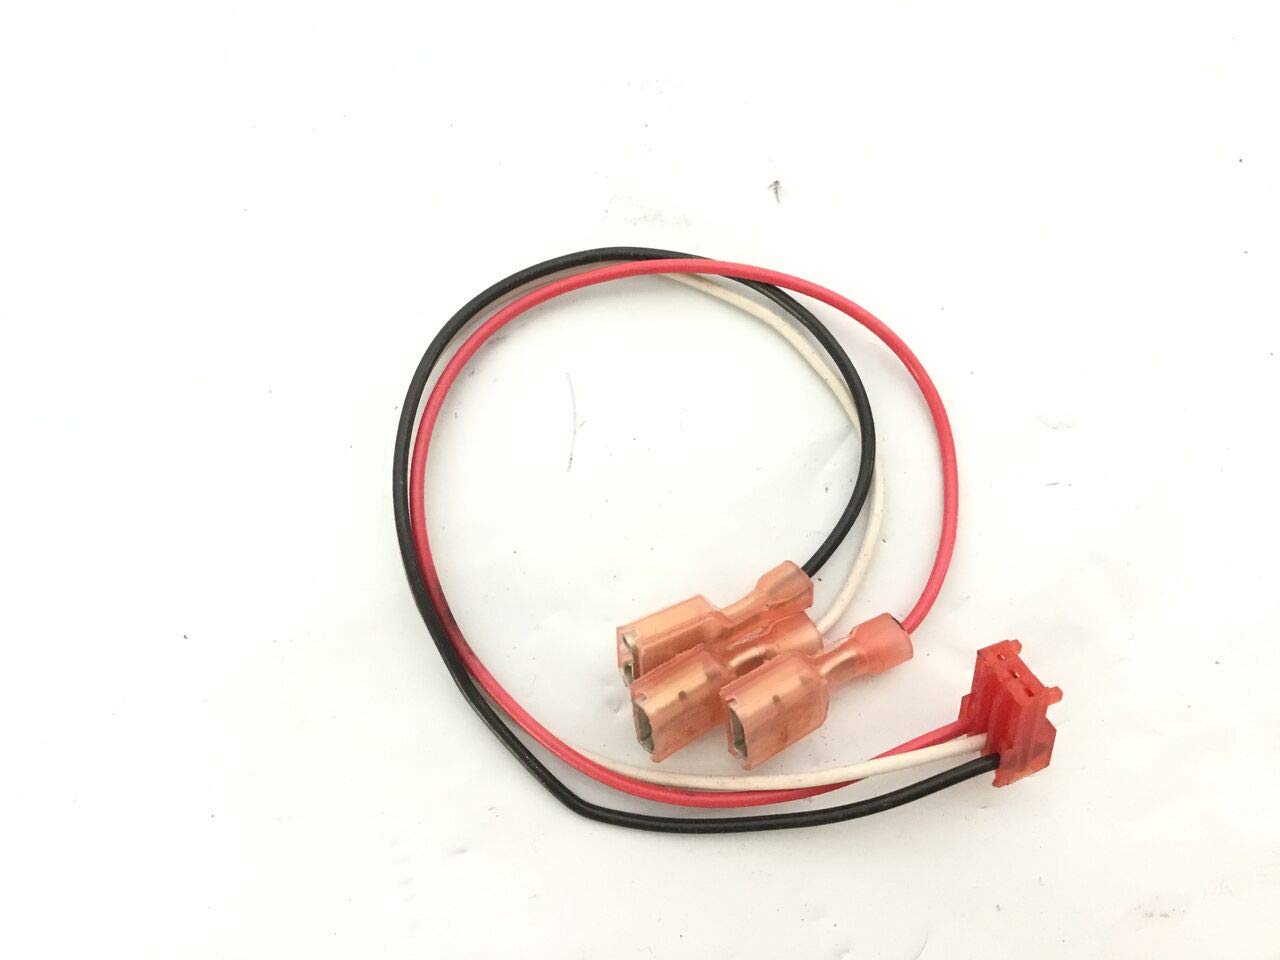 Motor Controller Wire Harness